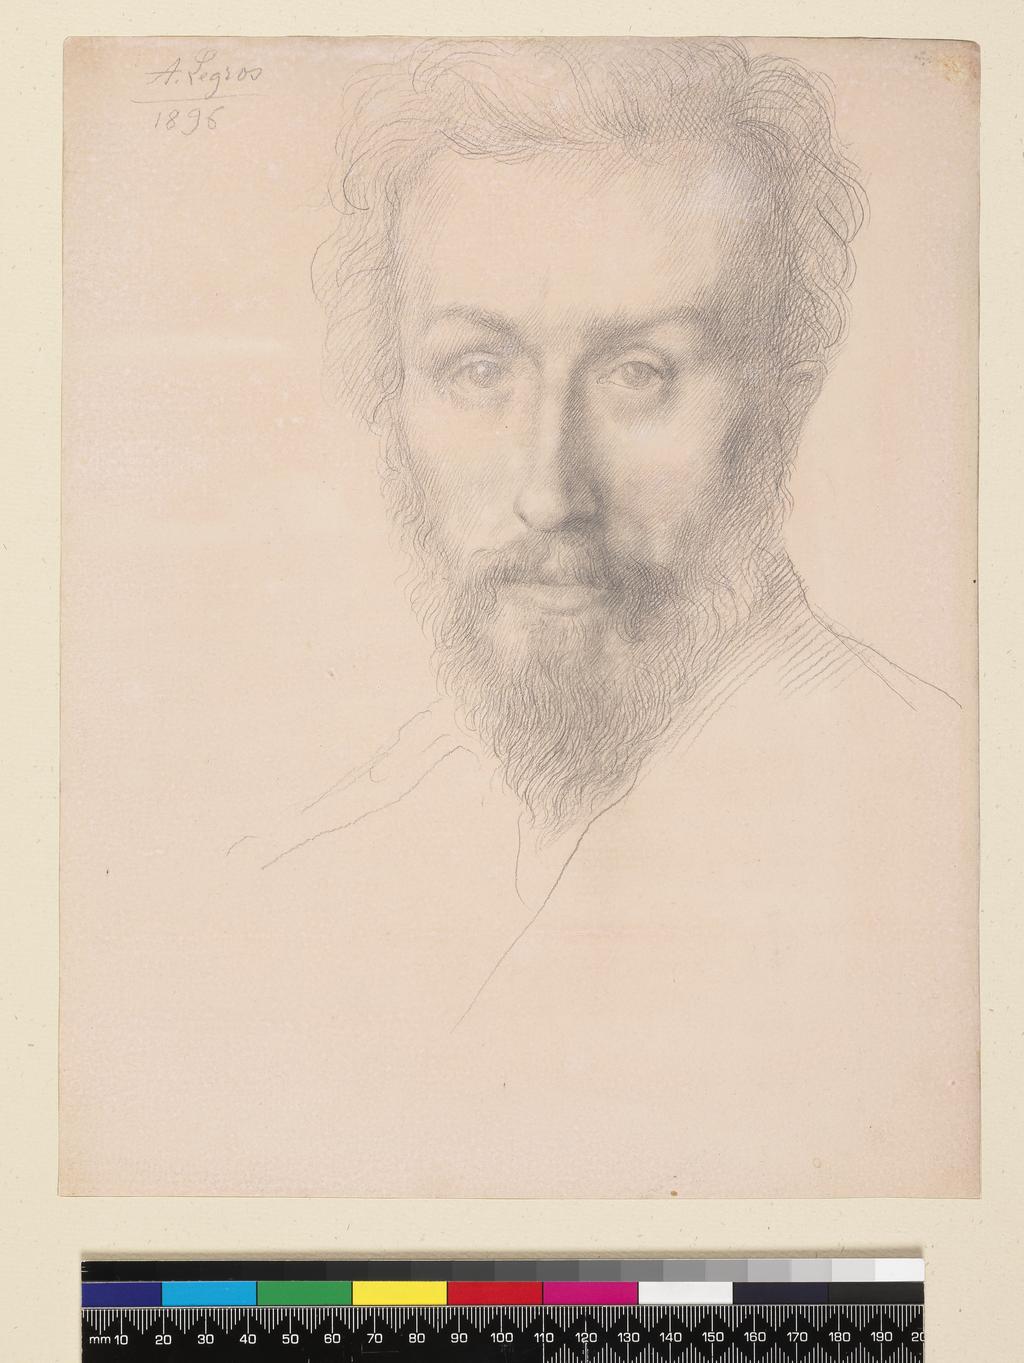 An image of Title/s: Portrait of Charles Ricketts, 1896Maker/s: Legros, Alphonse (draughtsman) [ULAN info: French artist, 1837-1911]Technique Description: silverpoint on pink prepared ground, on paperDimensions: height: 276 mm, width: 219 mmDate: 1896 